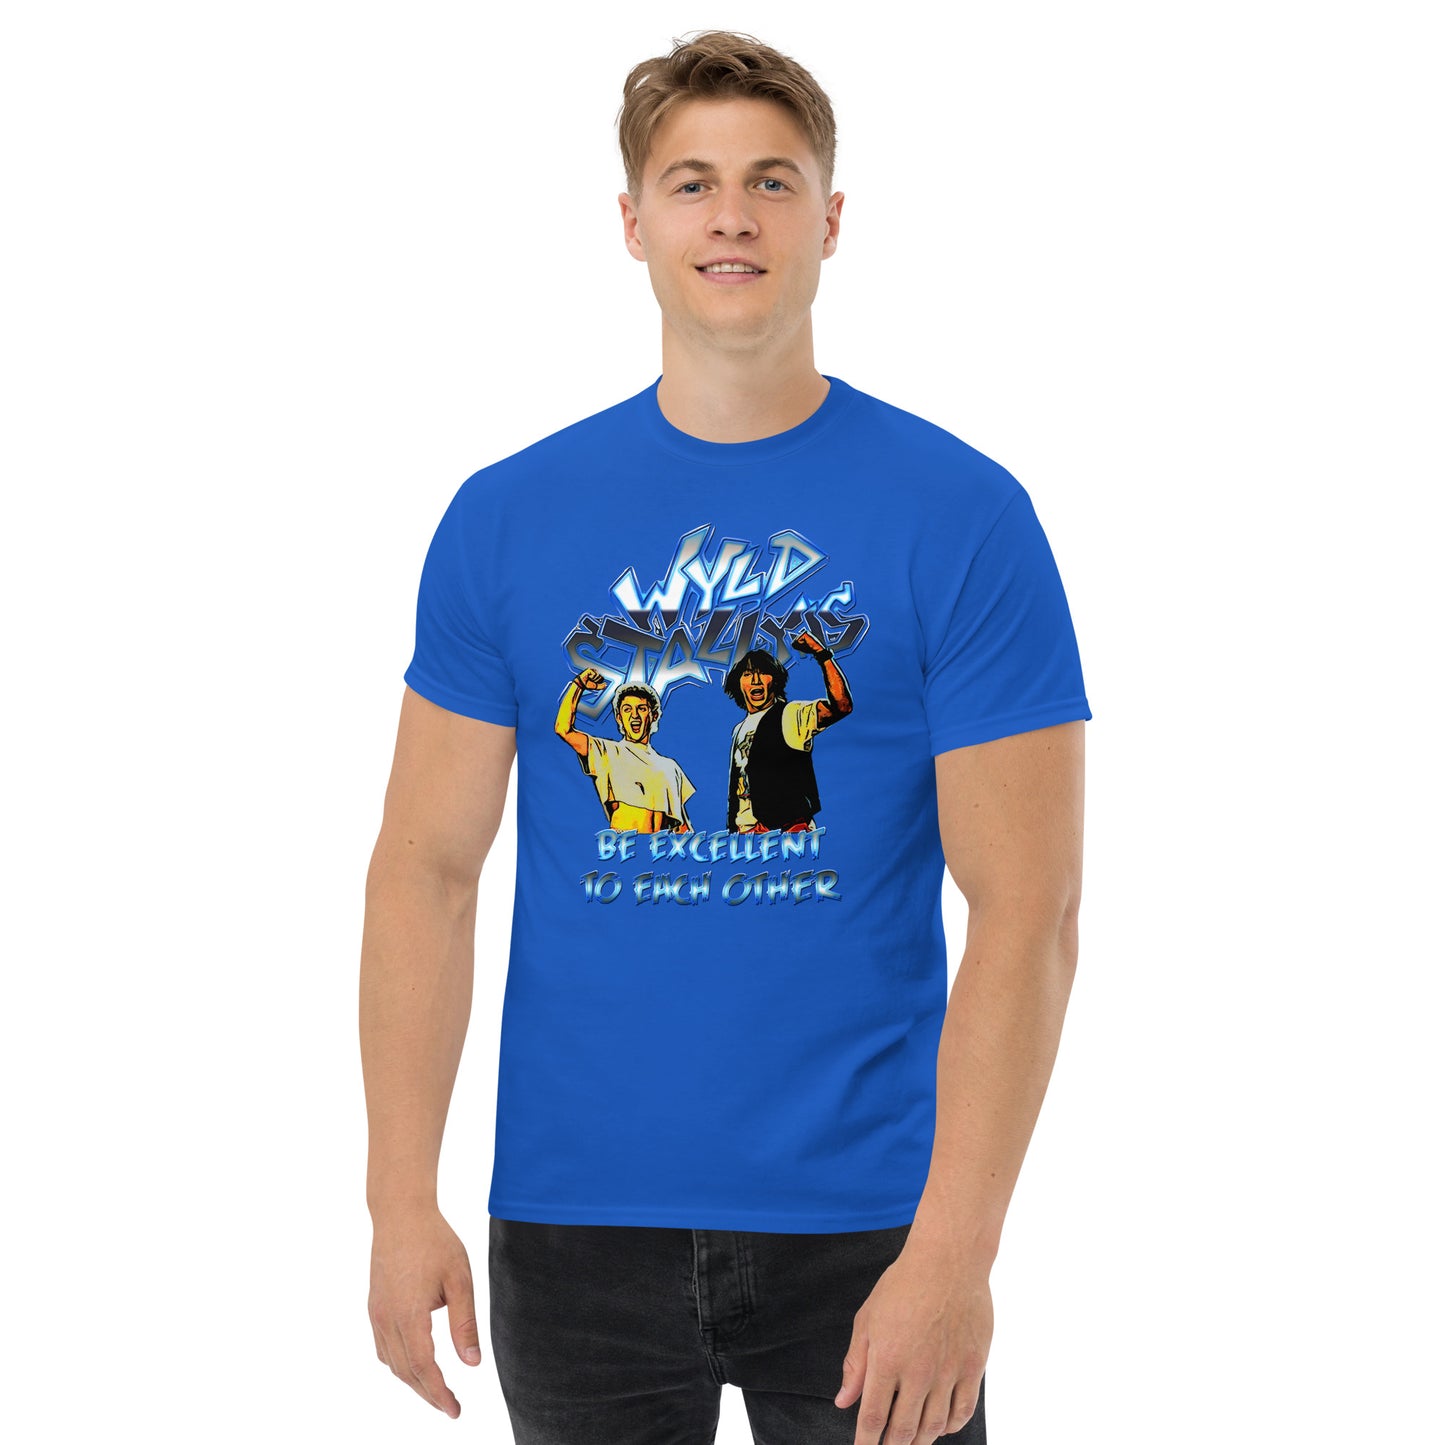 Wyld Stallyns Bill and Ted T-shirt - 80s Adventure Vibes - thenightmareinc